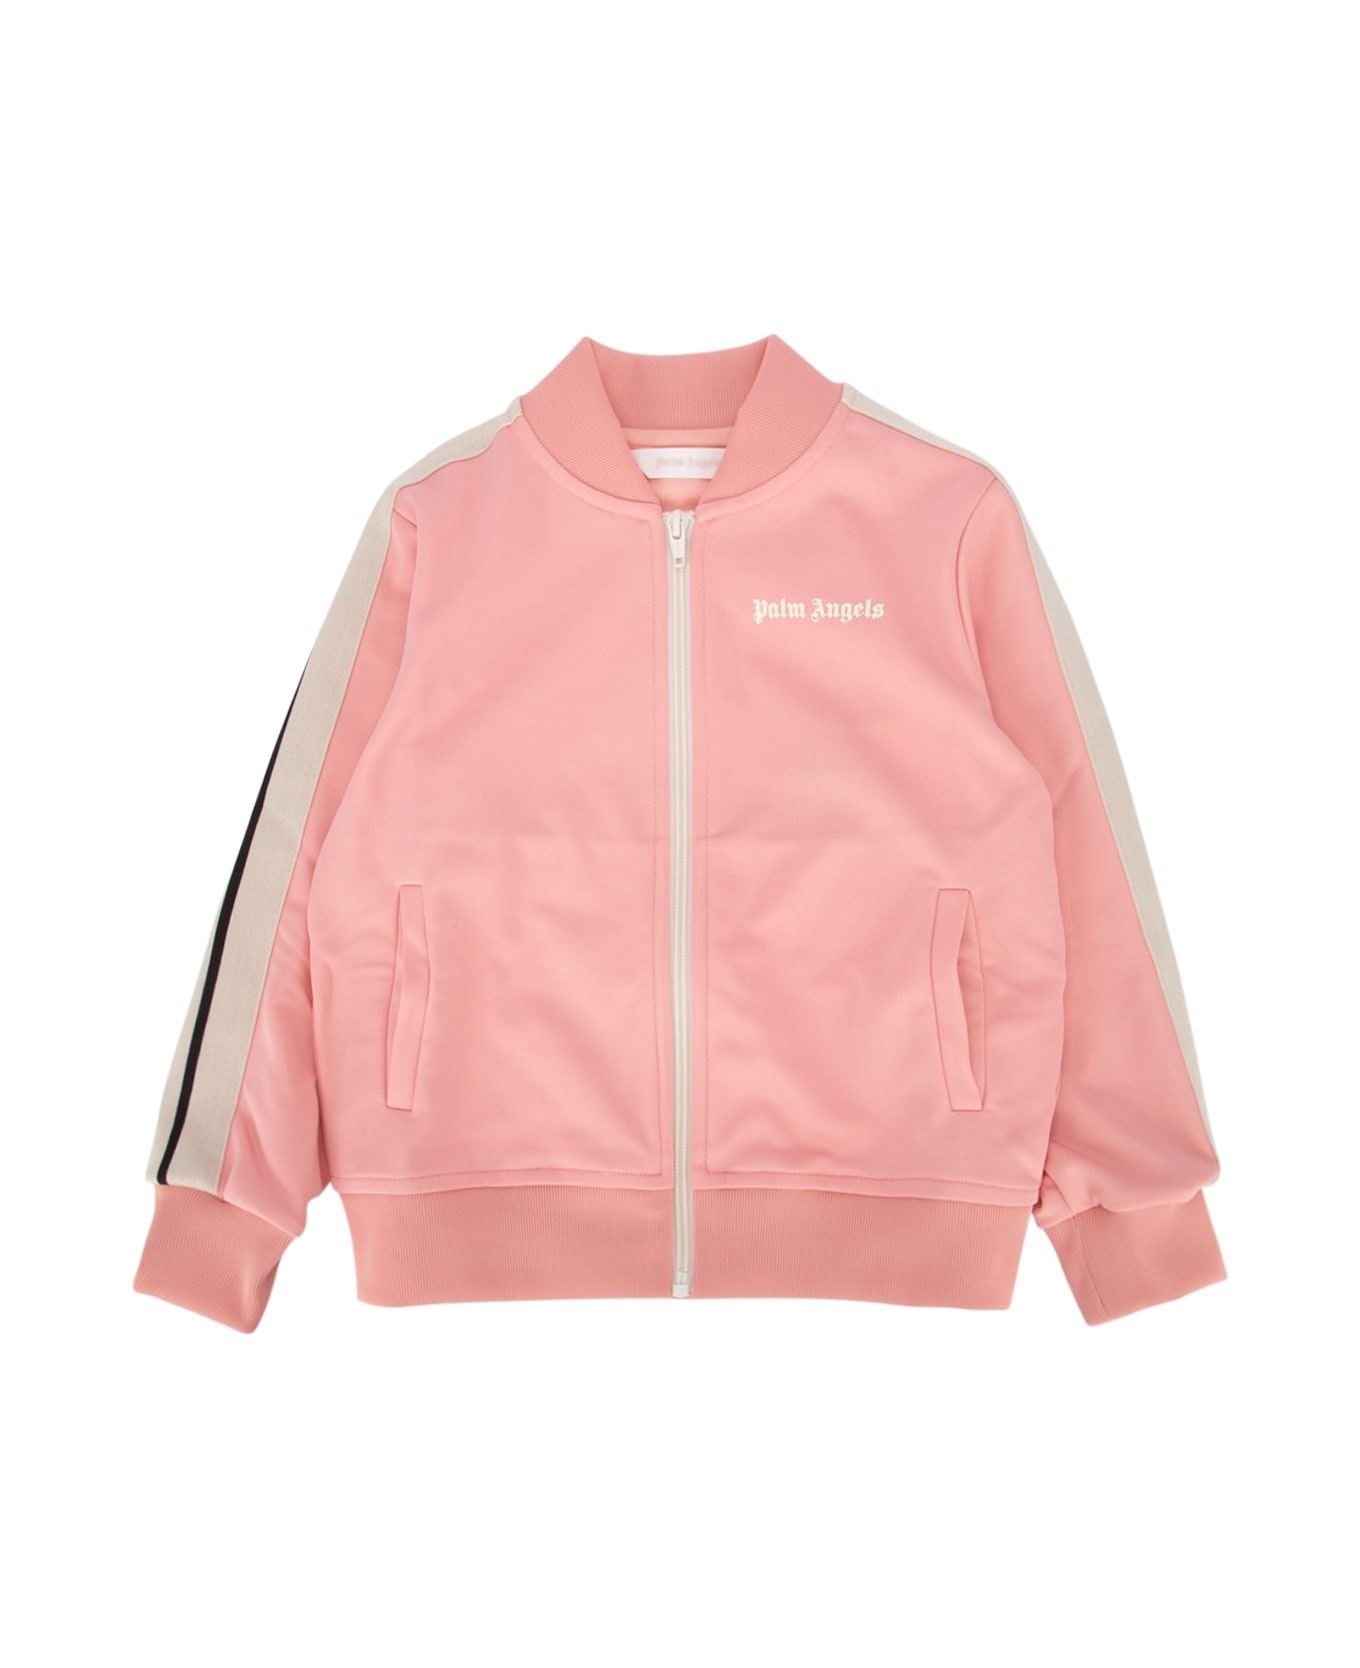 Palm Angels Giacca - PINKOFFWHITE